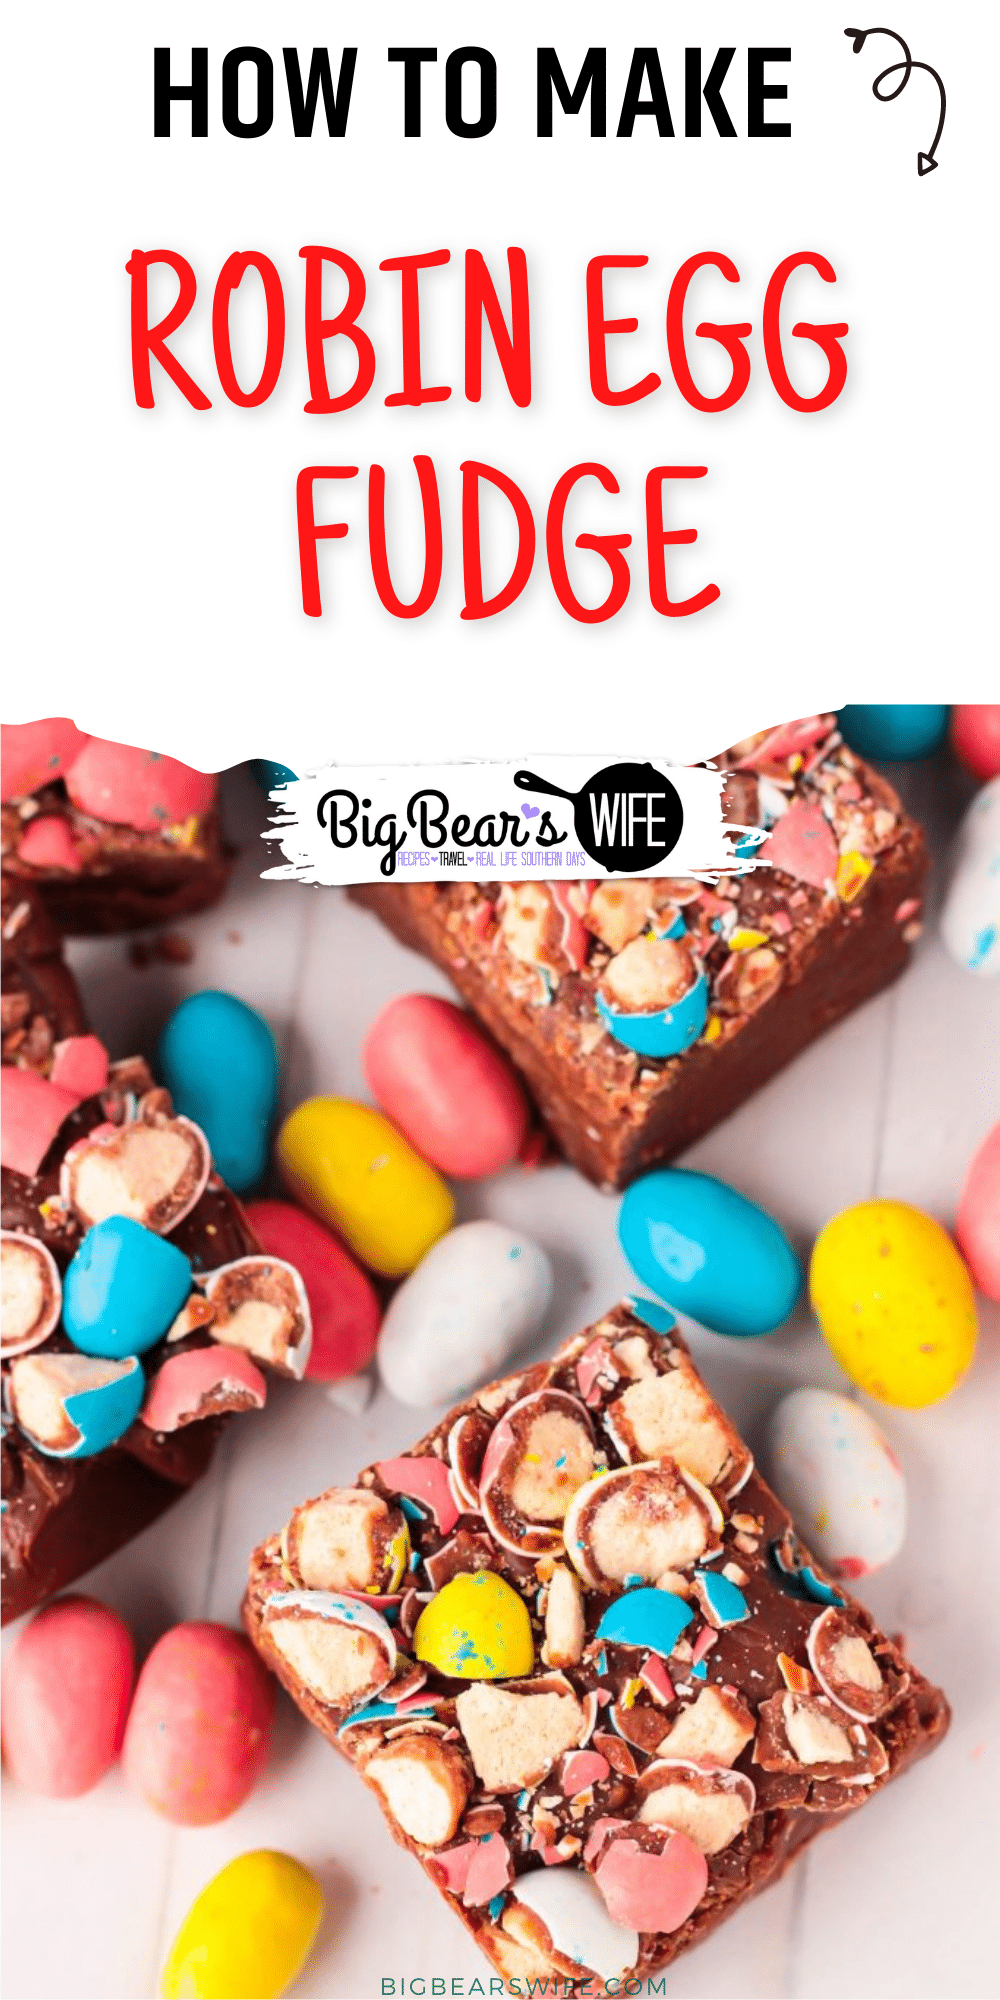 This 3 ingredient Robin Egg fudge is perfect for Easter or any Spring get together! It takes minute to make and it'll become a recipe keeper instantly!  via @bigbearswife